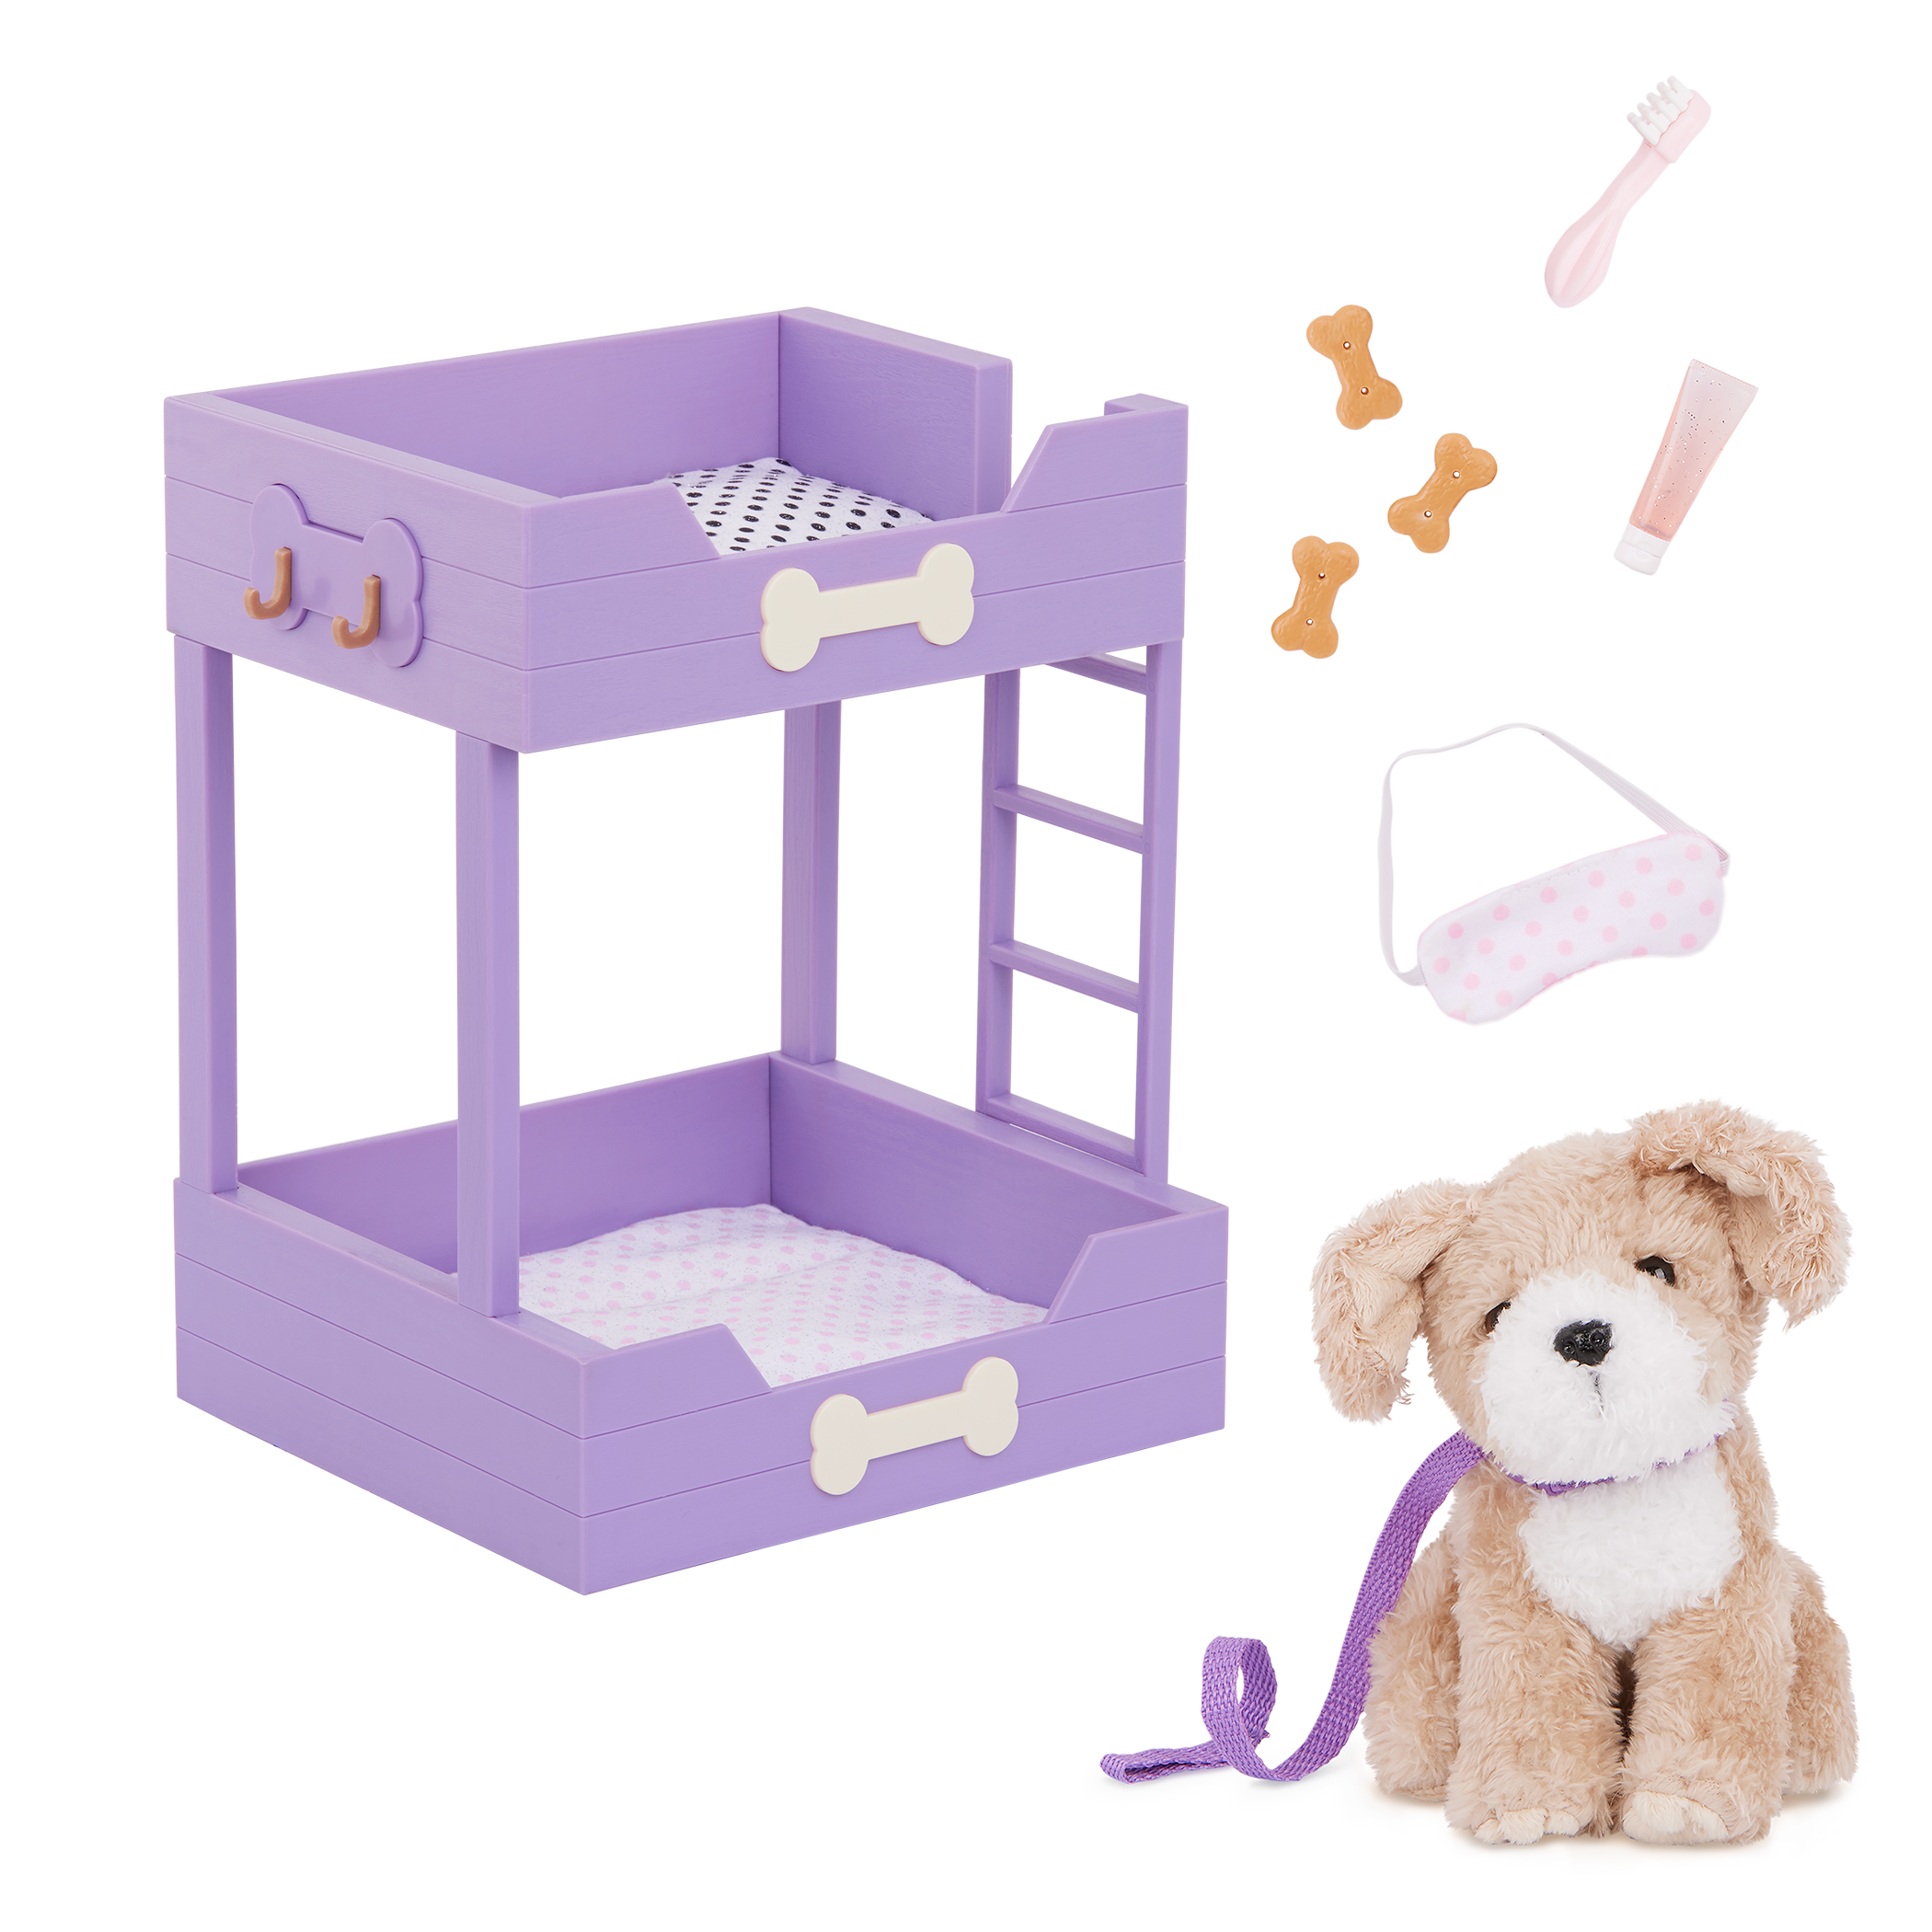 Our Generation Pup Bunk Bed & Plush Puppy Set 